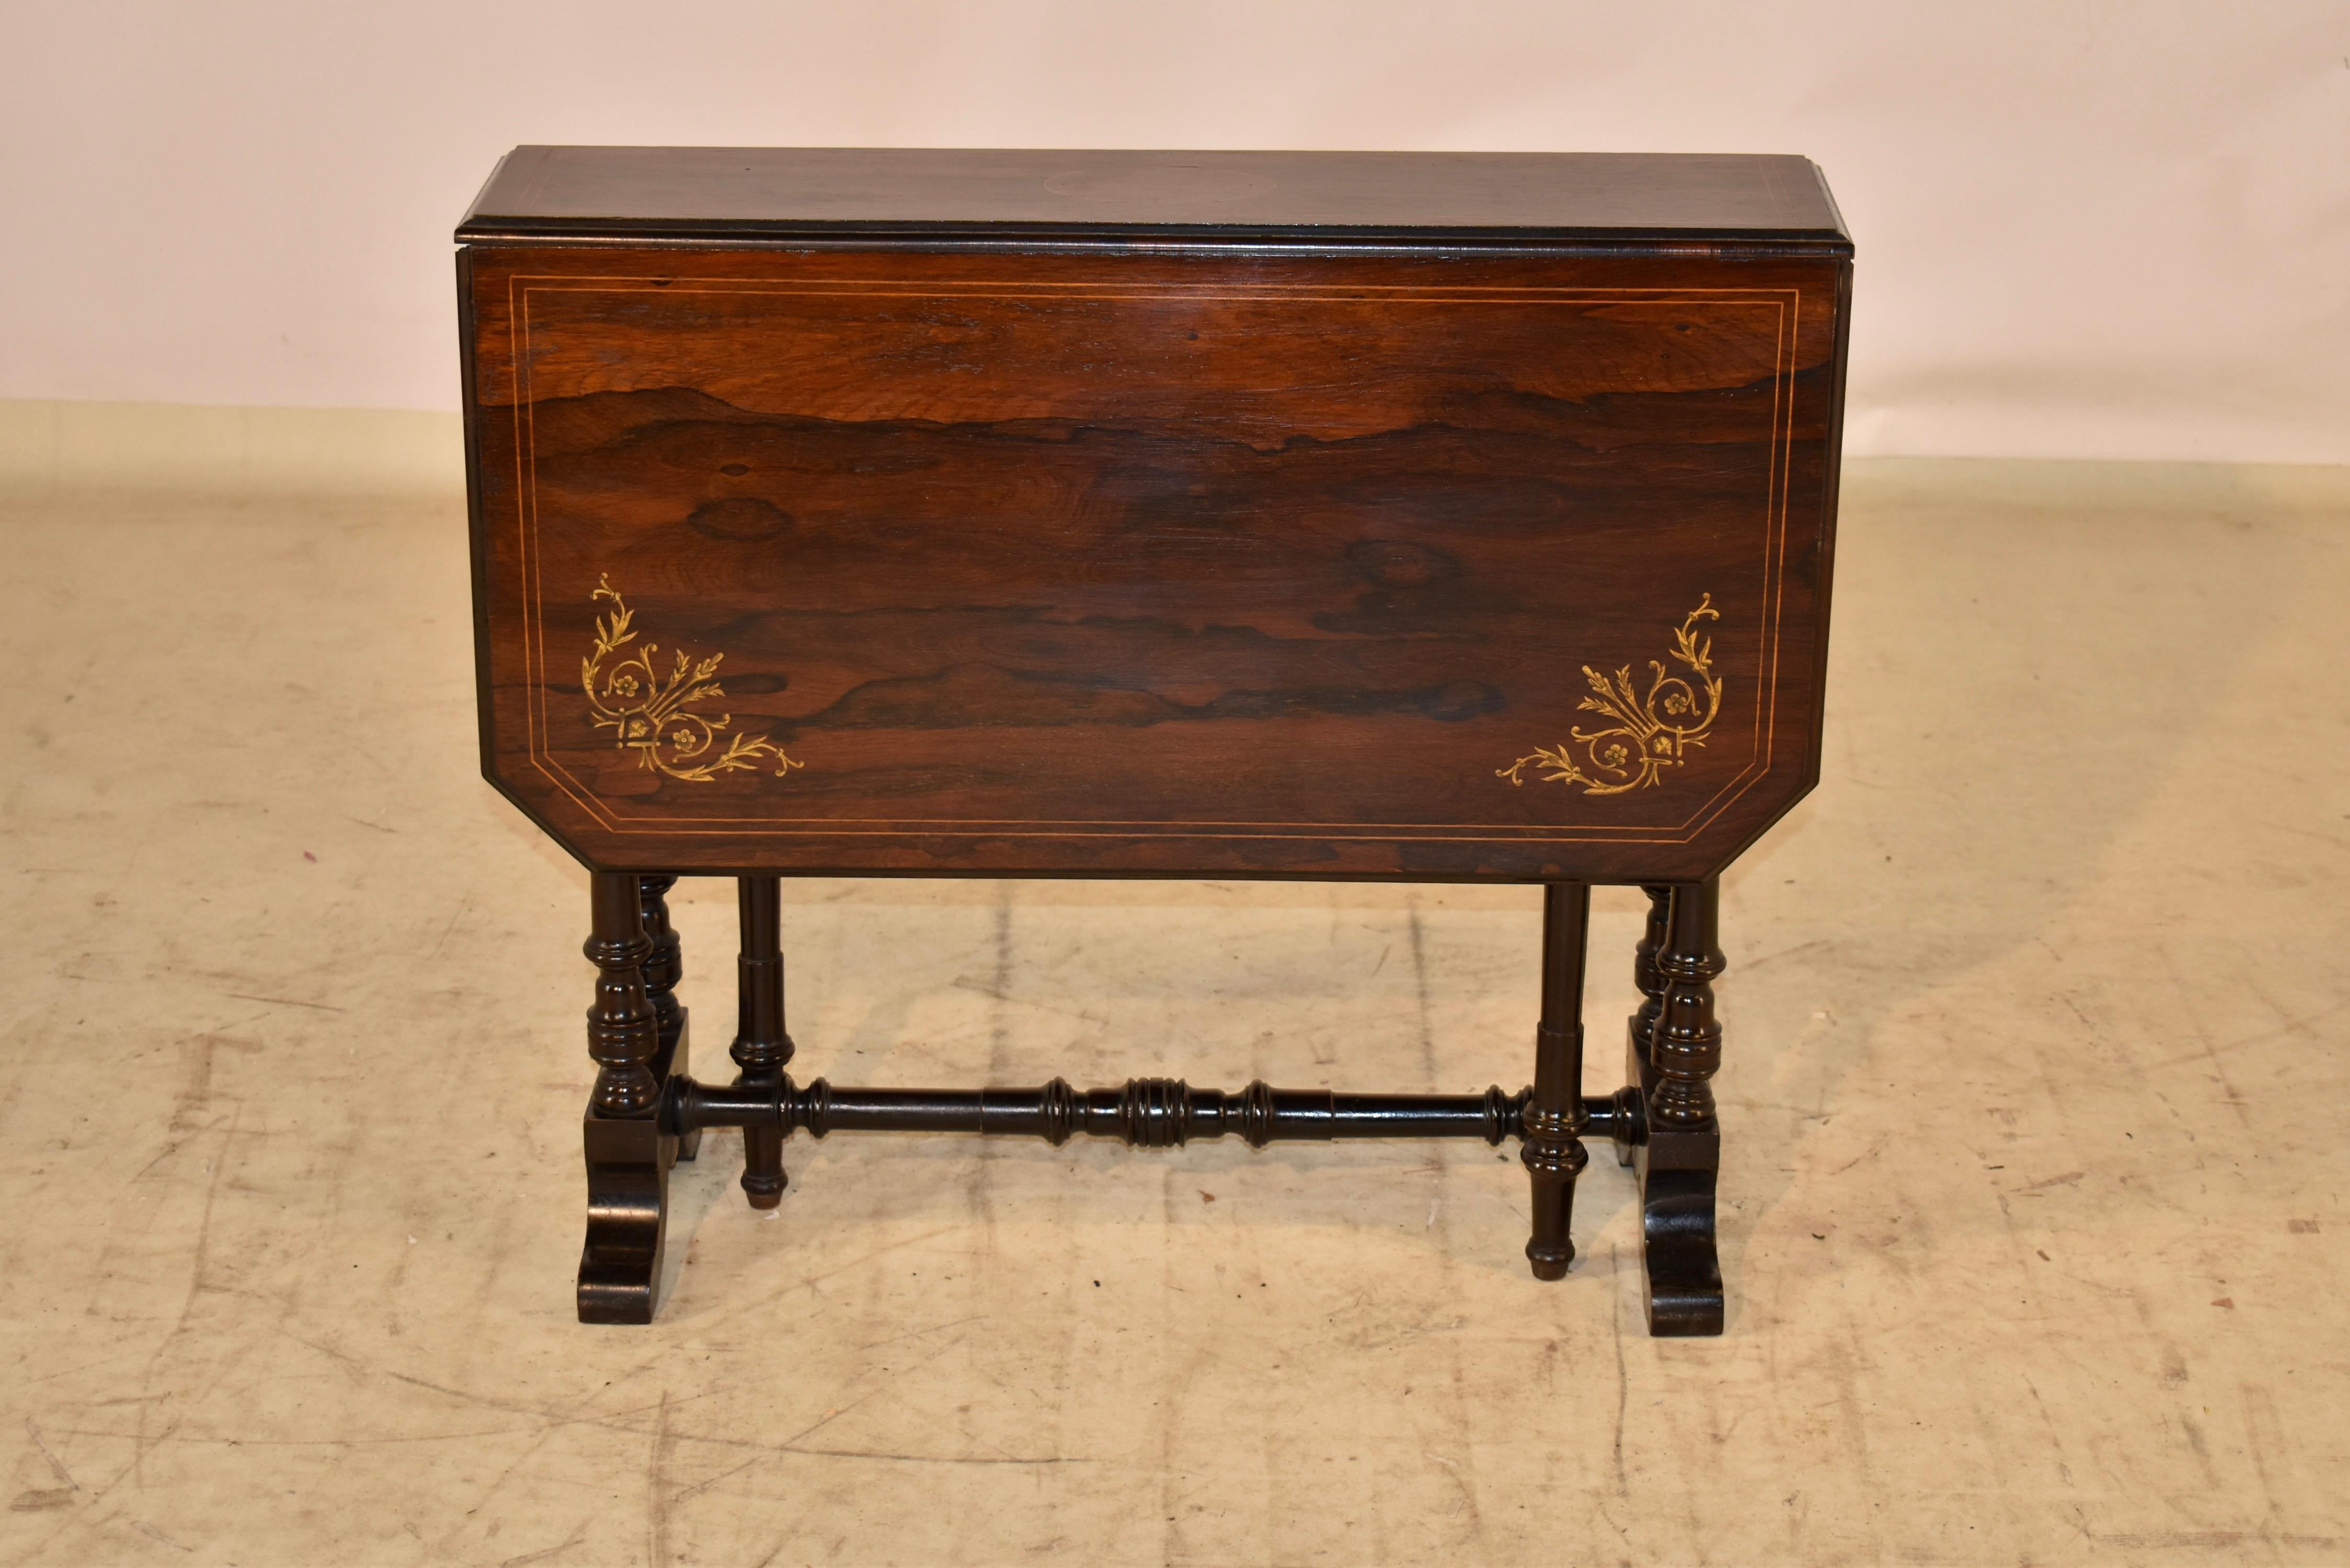 19th century Sutherland table from England made form Rosewood. The top is fantastic and has lovely graining, inlaid with satinwood and boxwood banding and decorative accents in the corners. The top with the leaves extended measure 35.75 w x 30 d.